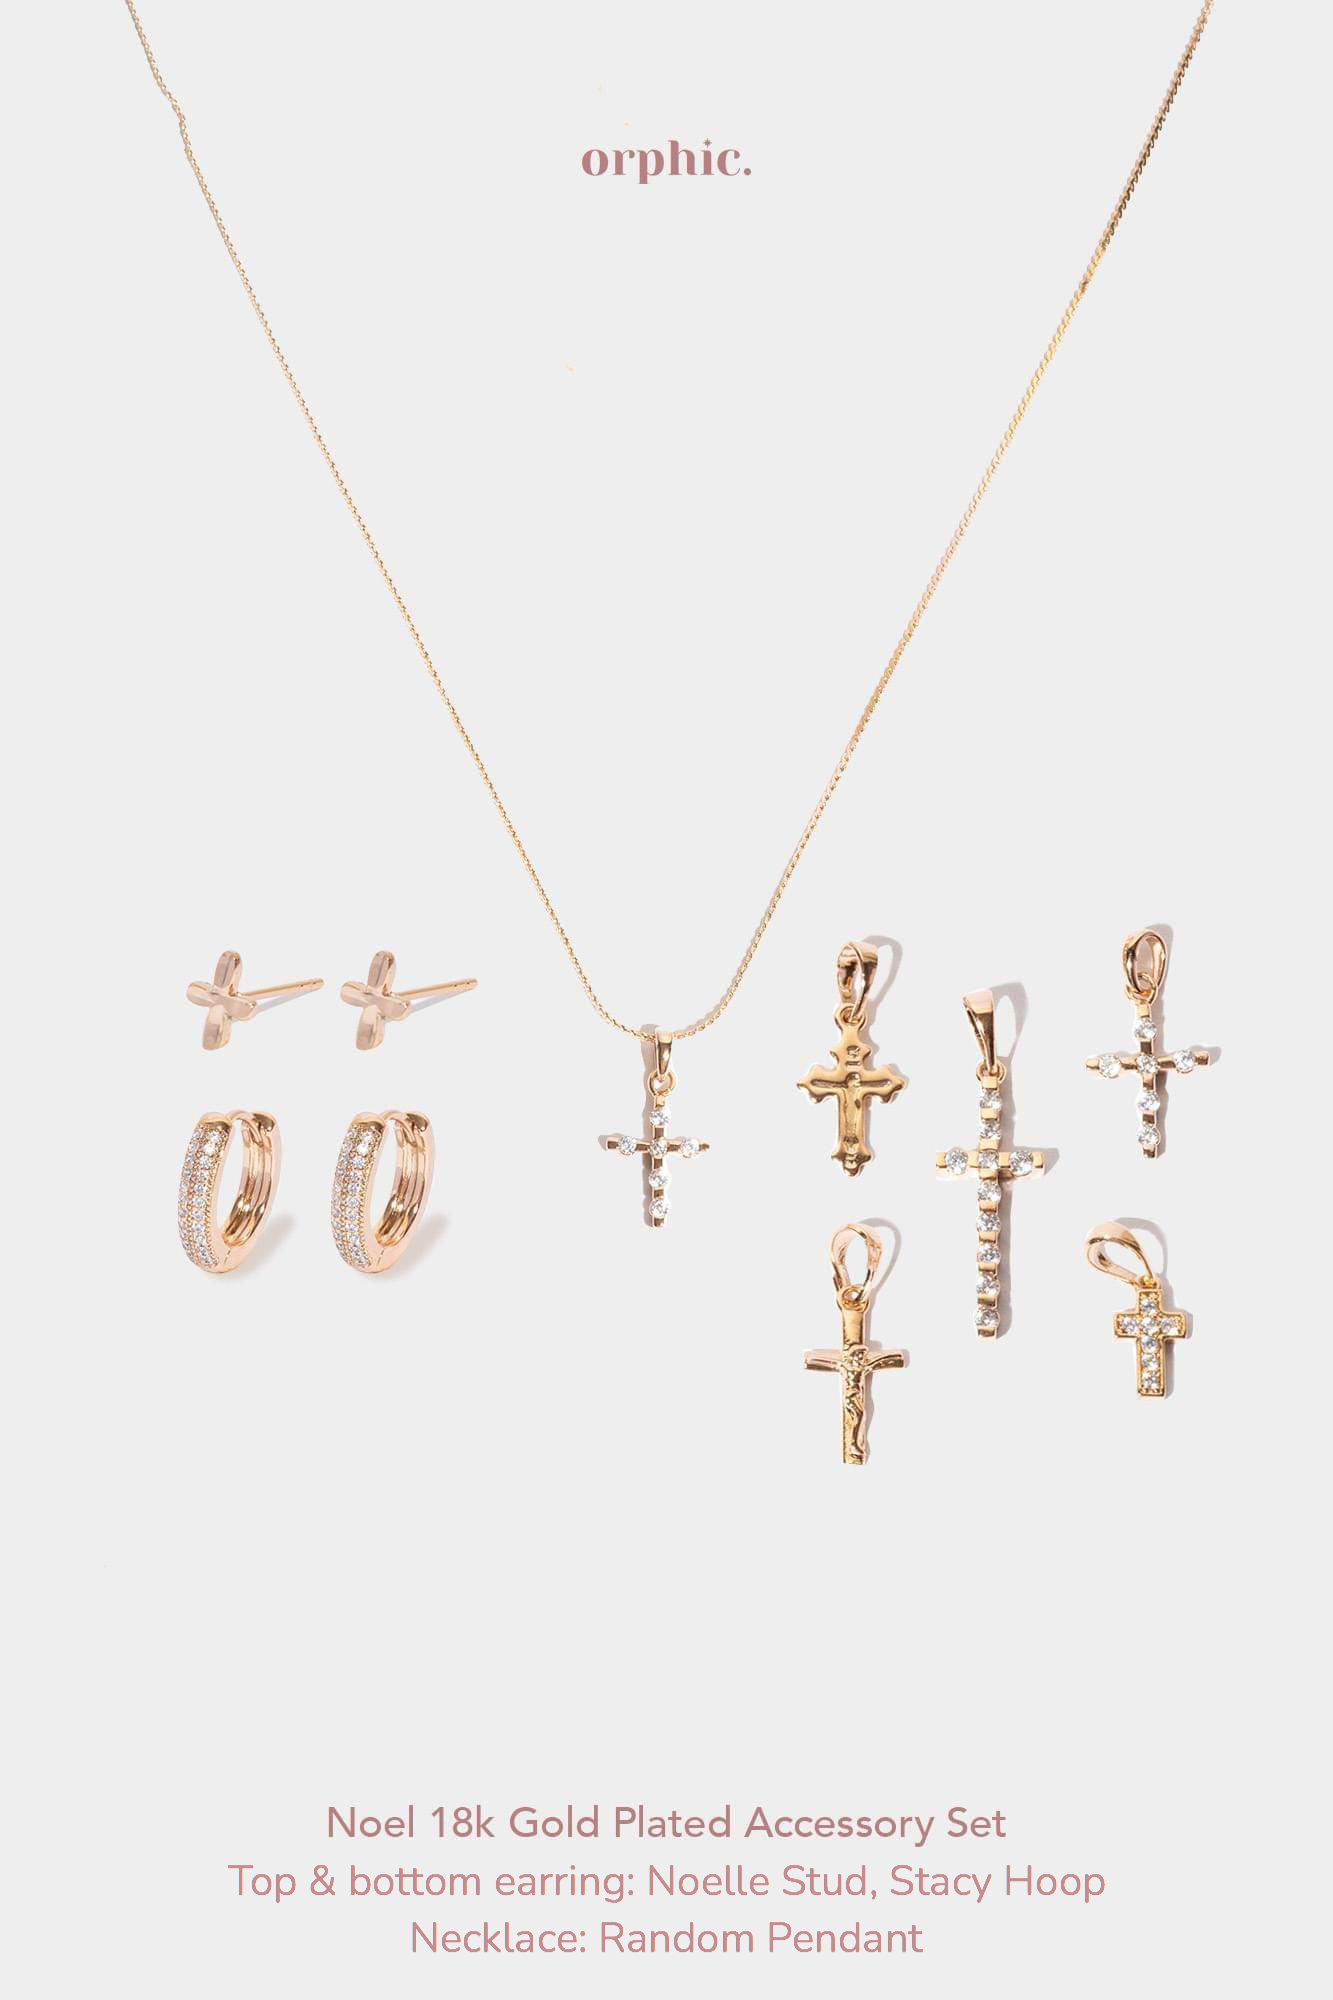 Noelle 18k Gold Plated Accessory Set